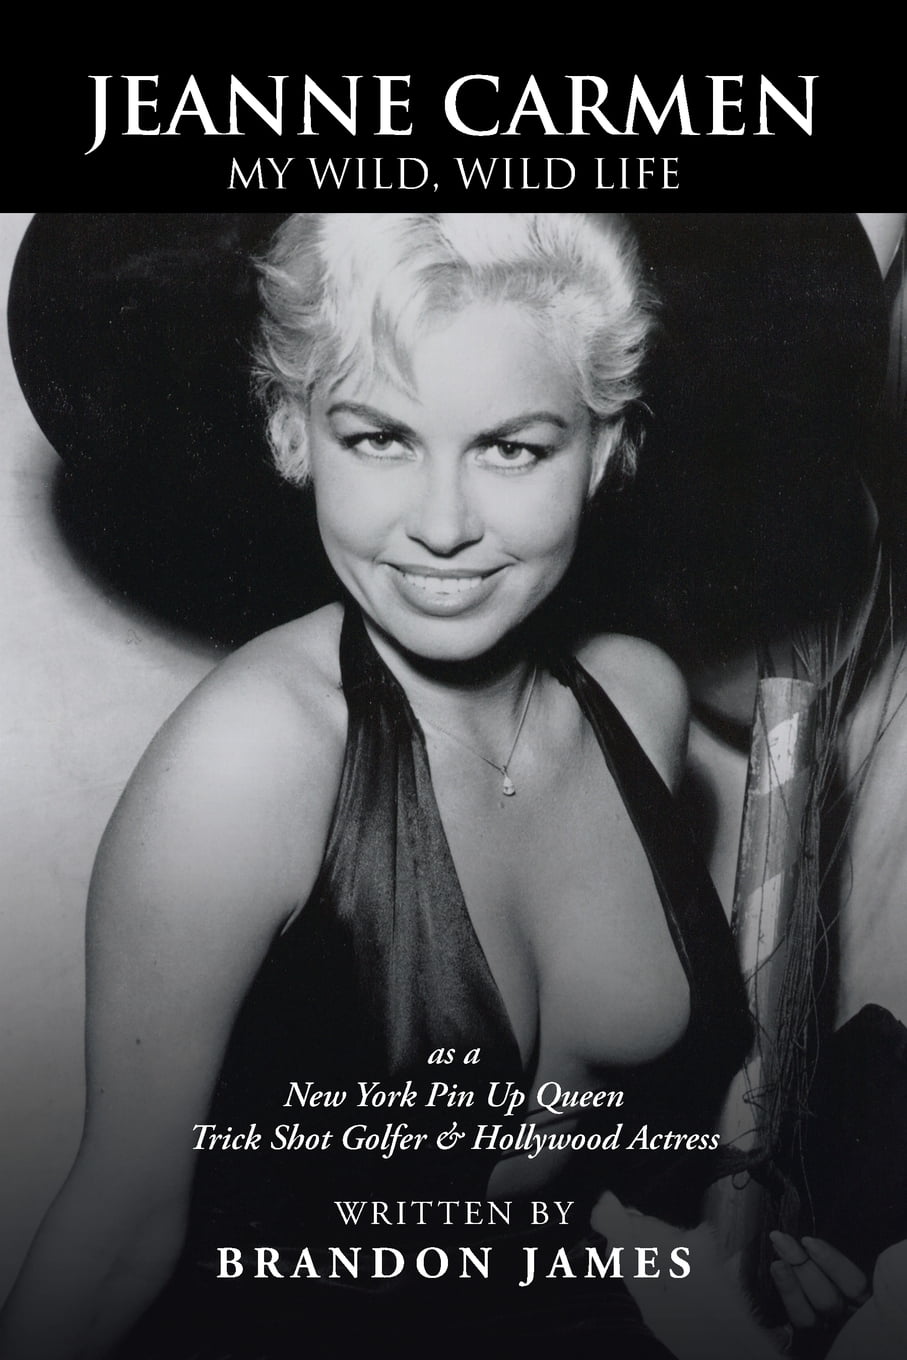 Jeanne Carmen : My Wild, Wild Life as a New York Pin Up Queen, Wal-mart, Wa...